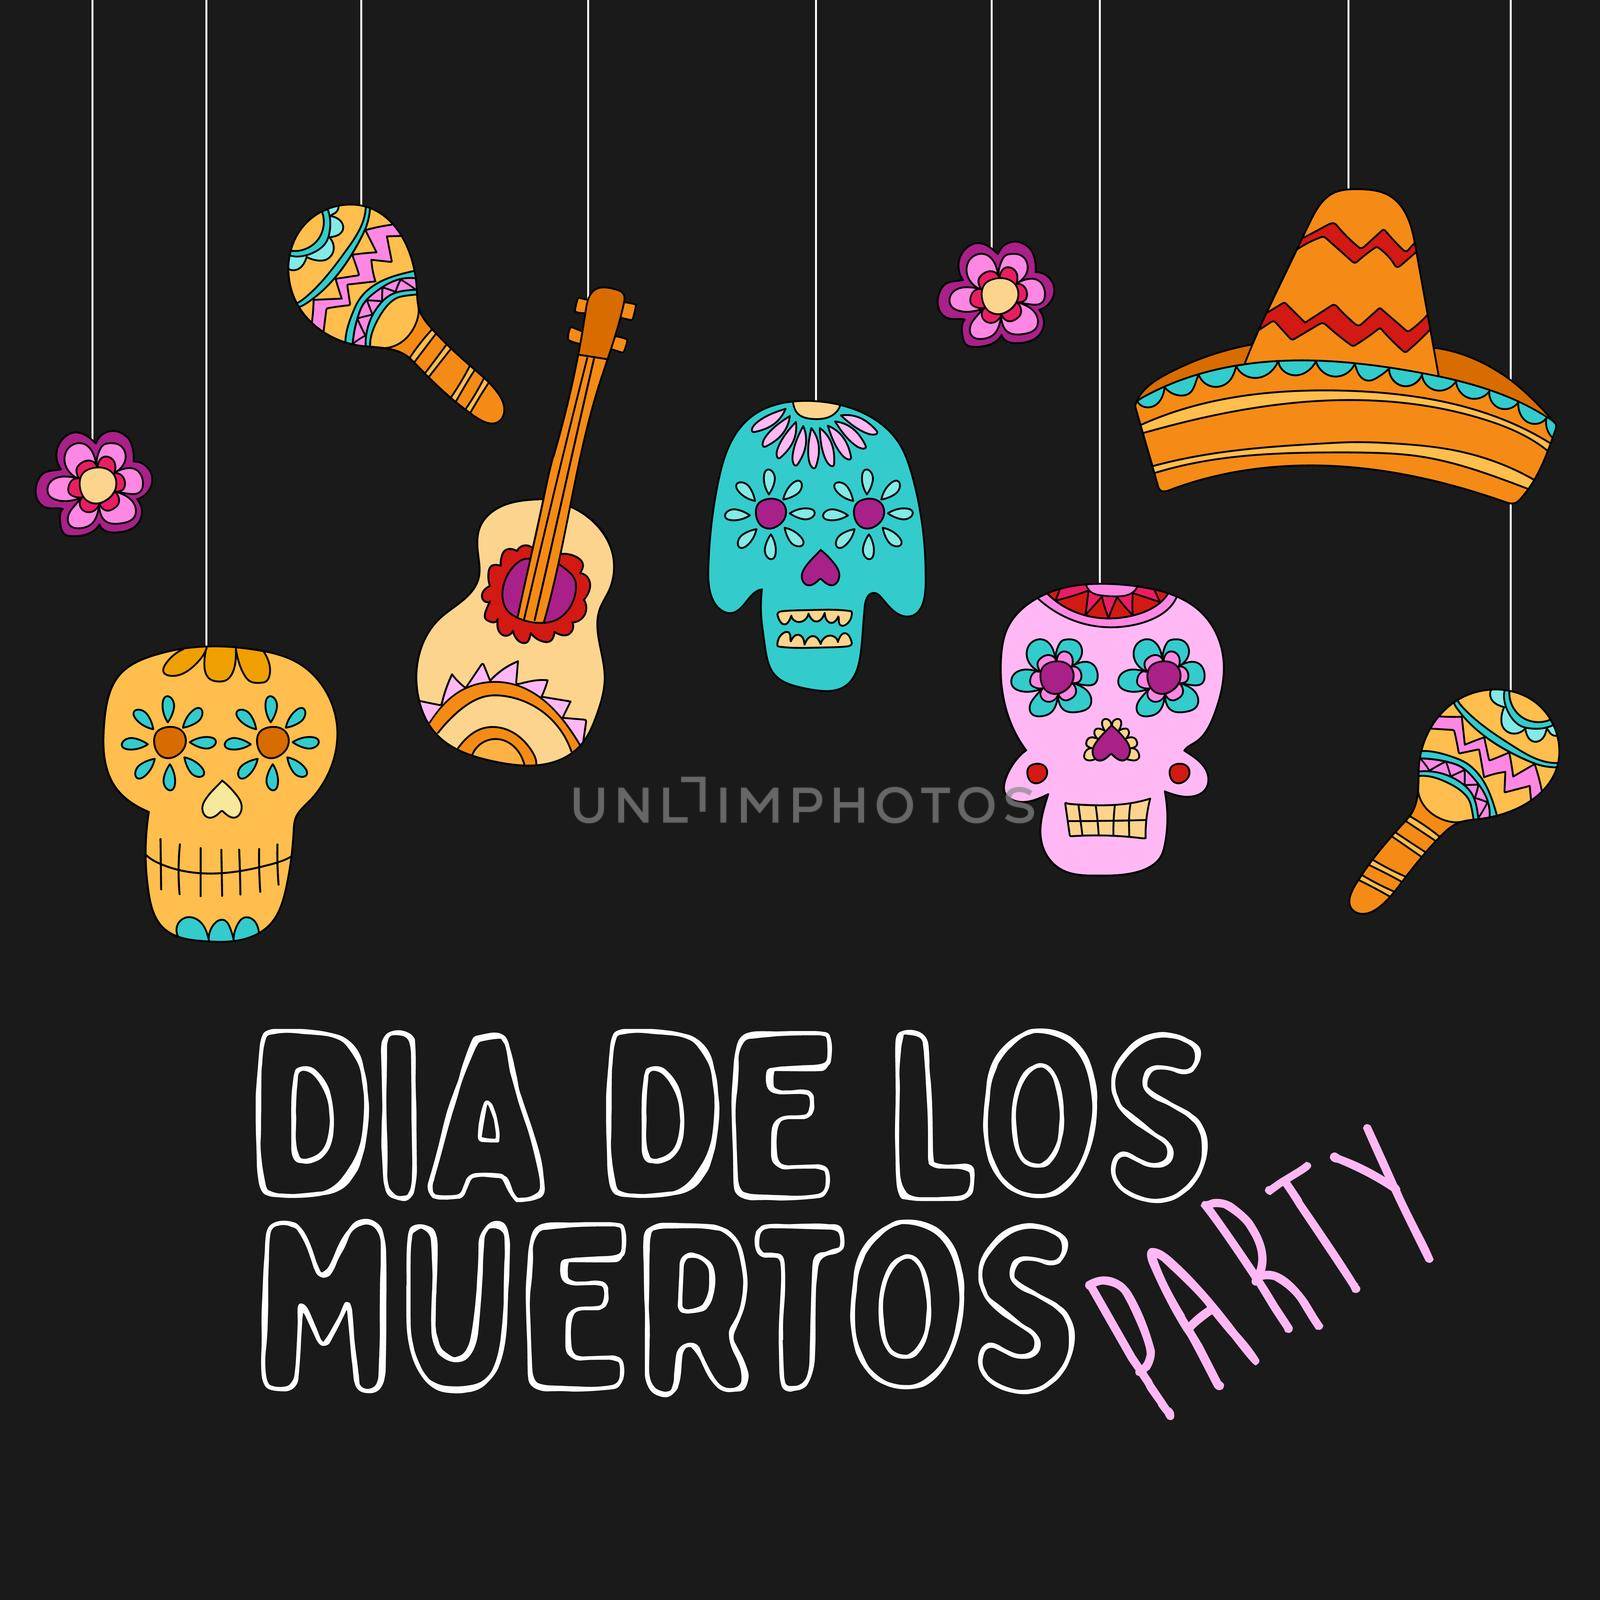 Day of the dead, Dia de los muertos, banner with colorful Mexican elements by natali_brill